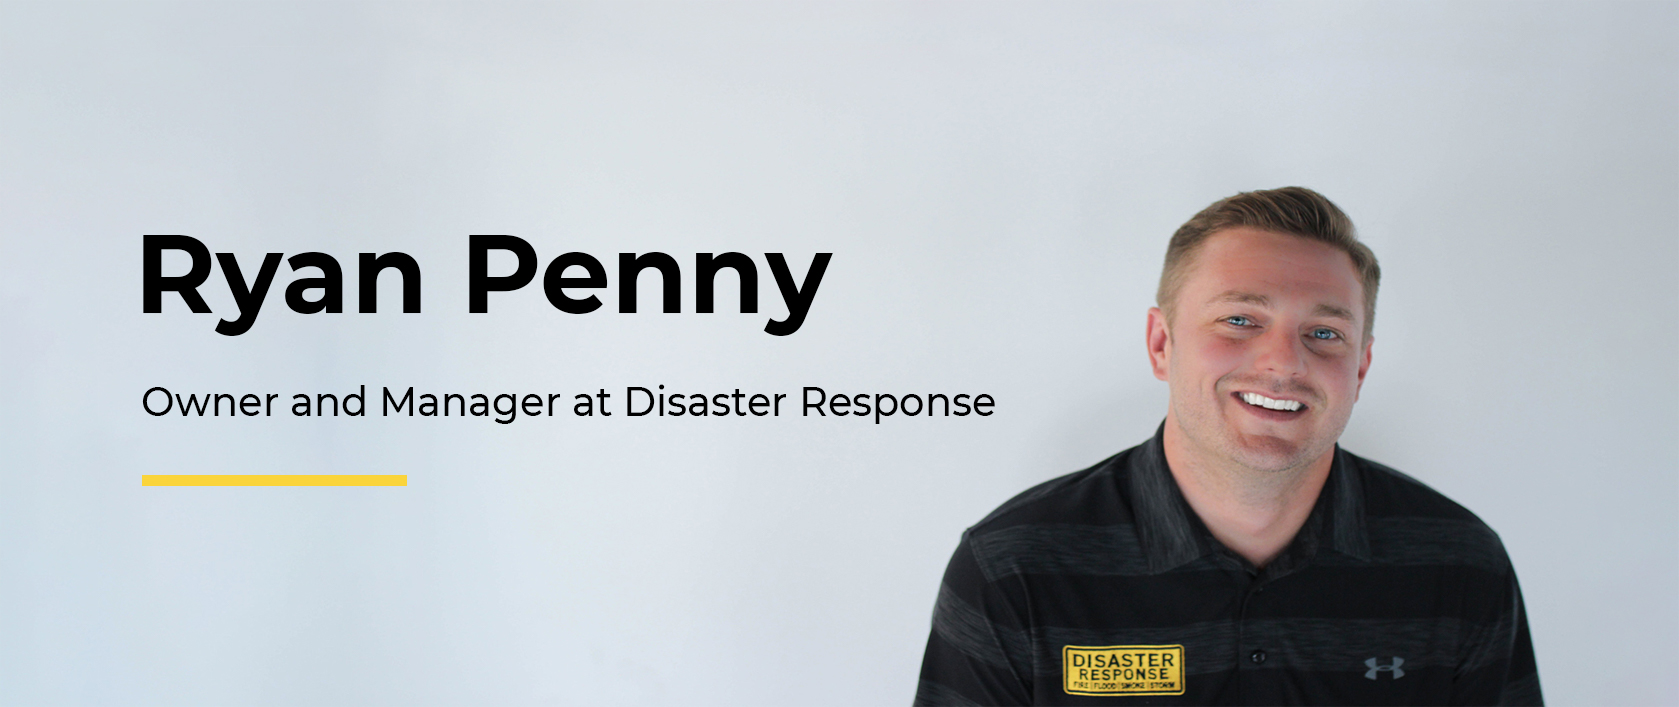 Ryan Penny, Owner and Manager at Disaster Response